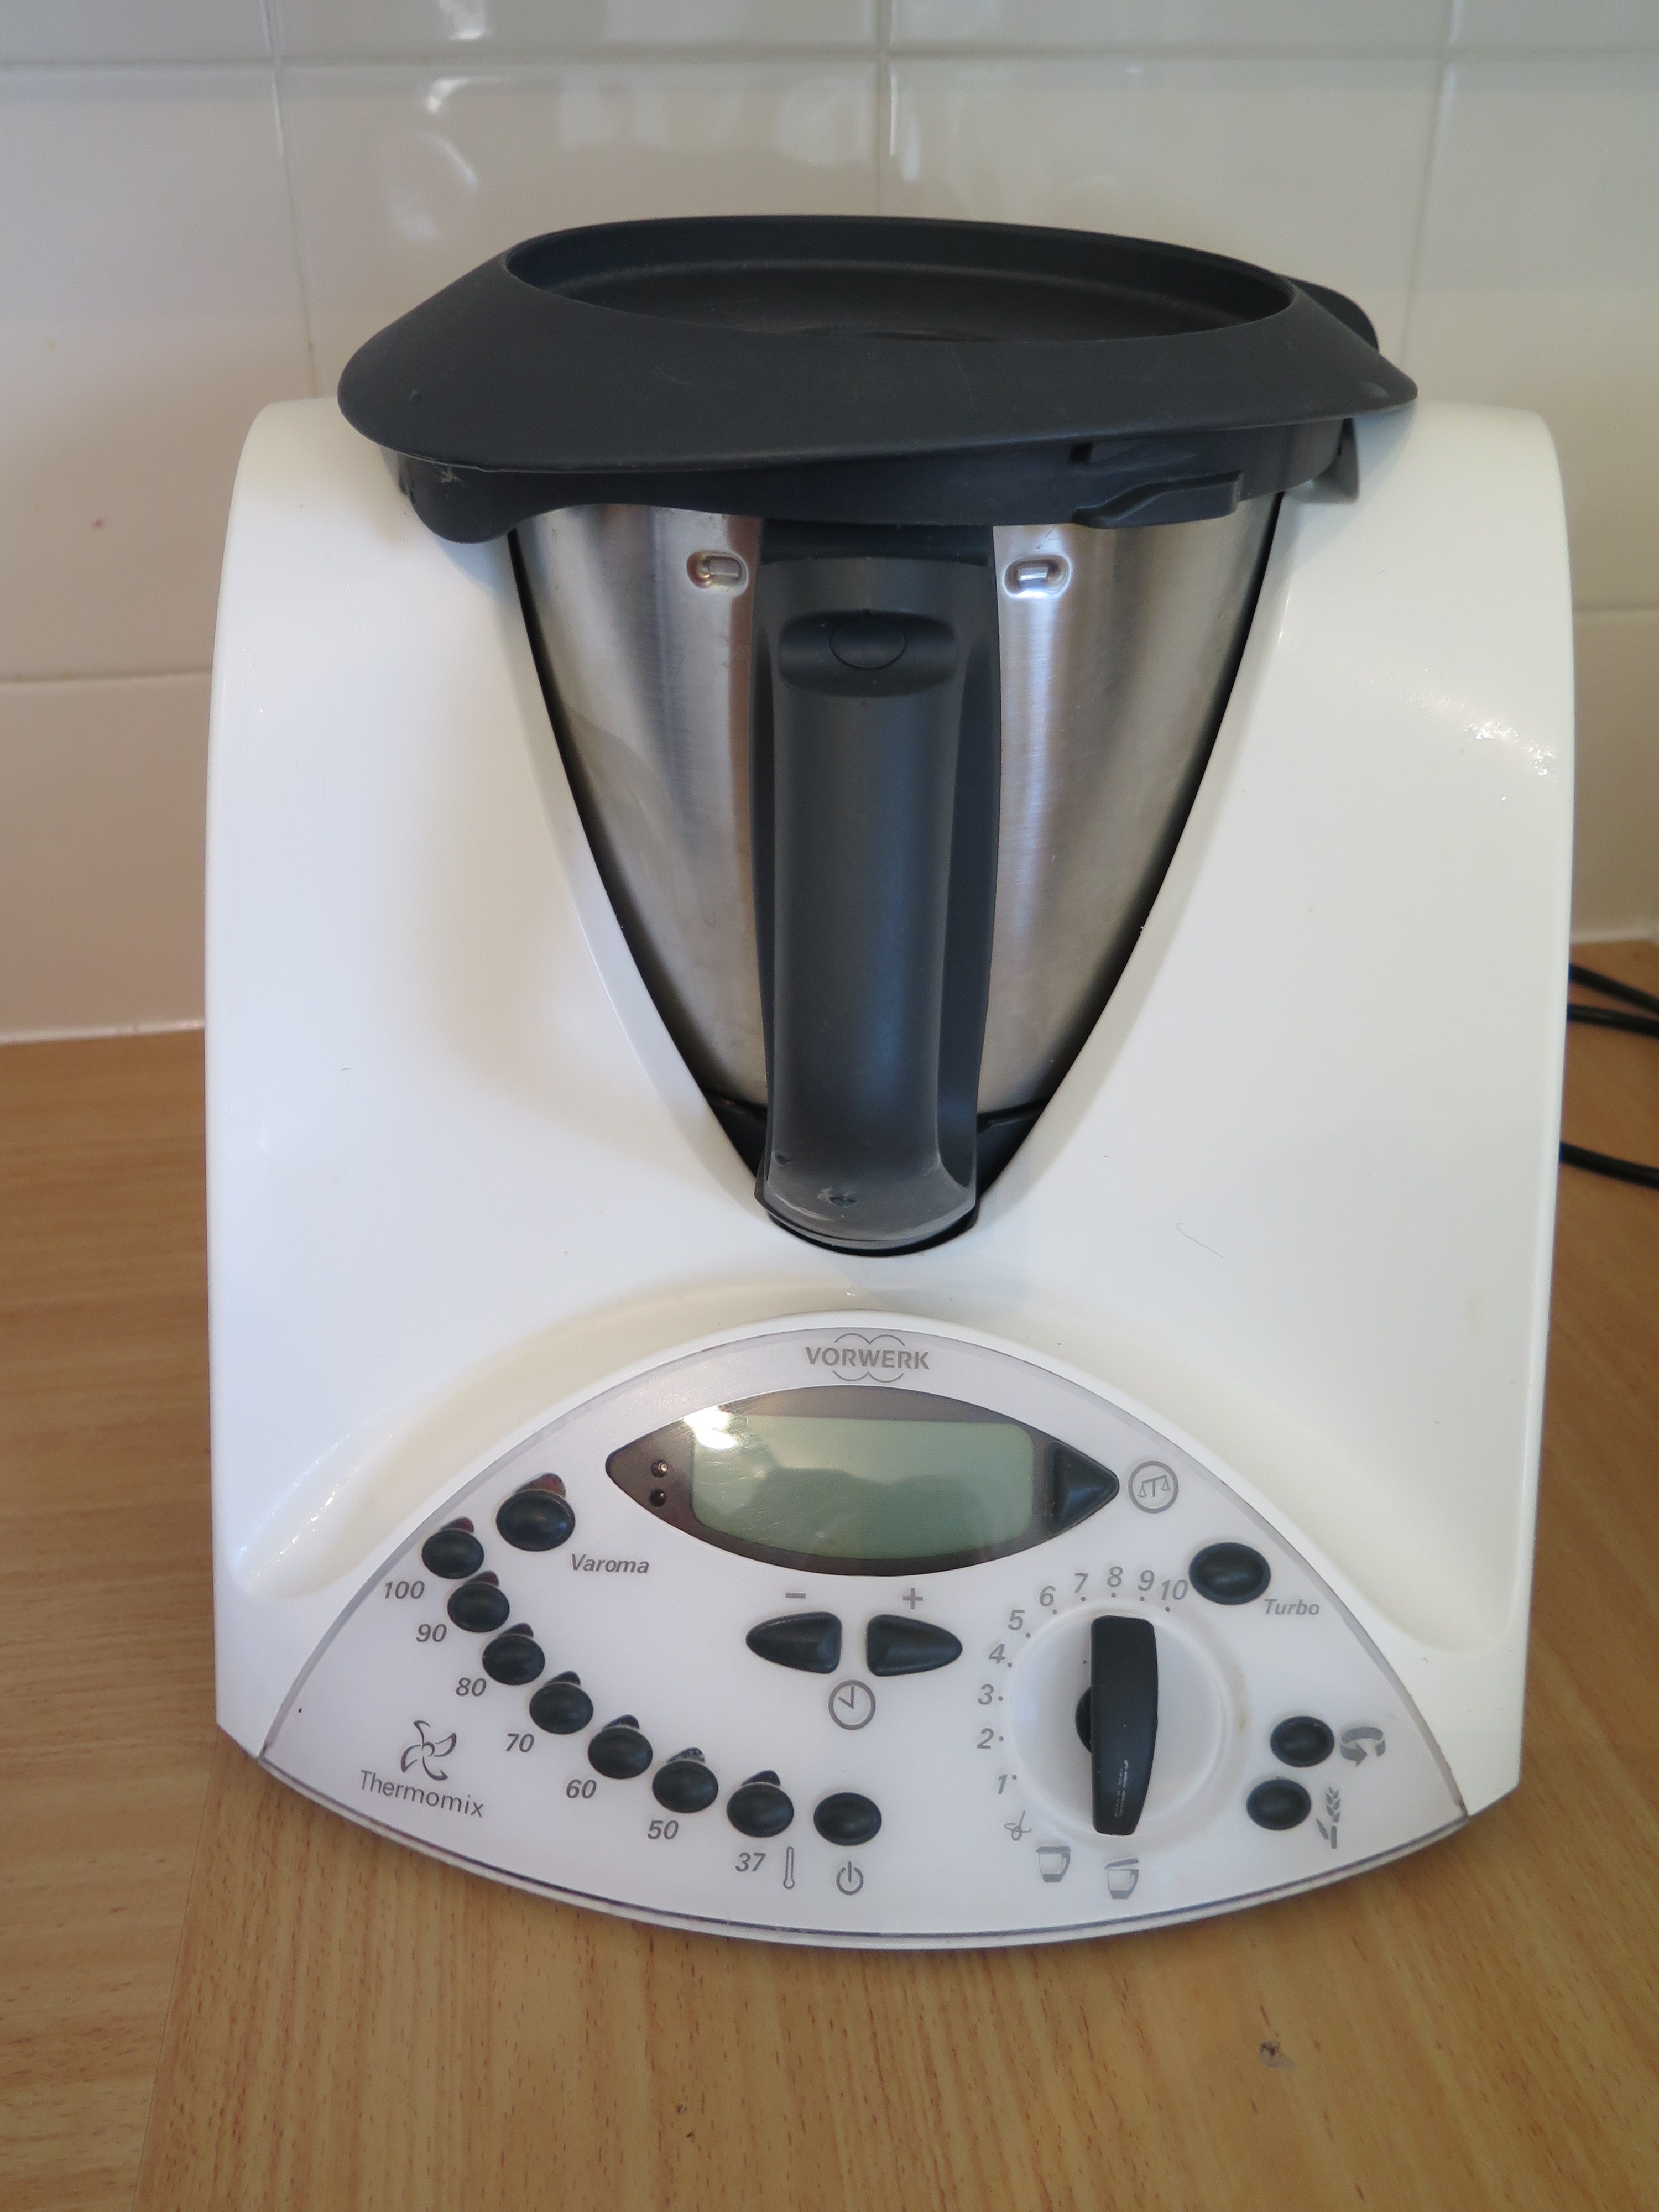 What is a Thermomix and Should You Buy One?